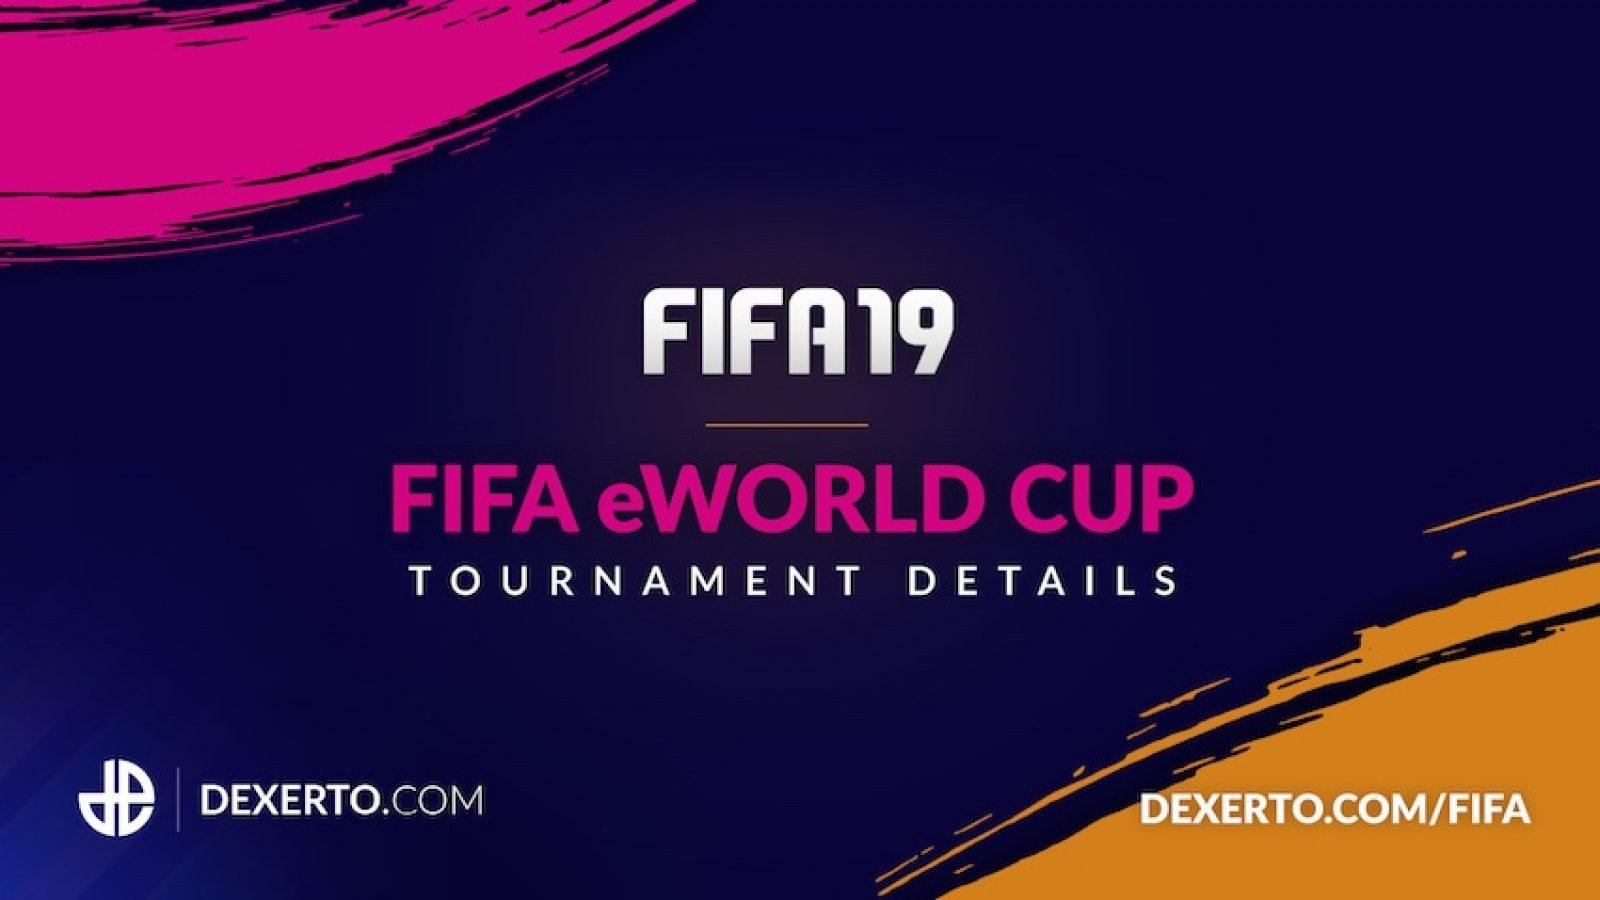 DrErhano Rage Quits on Main Stage at FIFA eWorld Cup 2018 - Dexerto